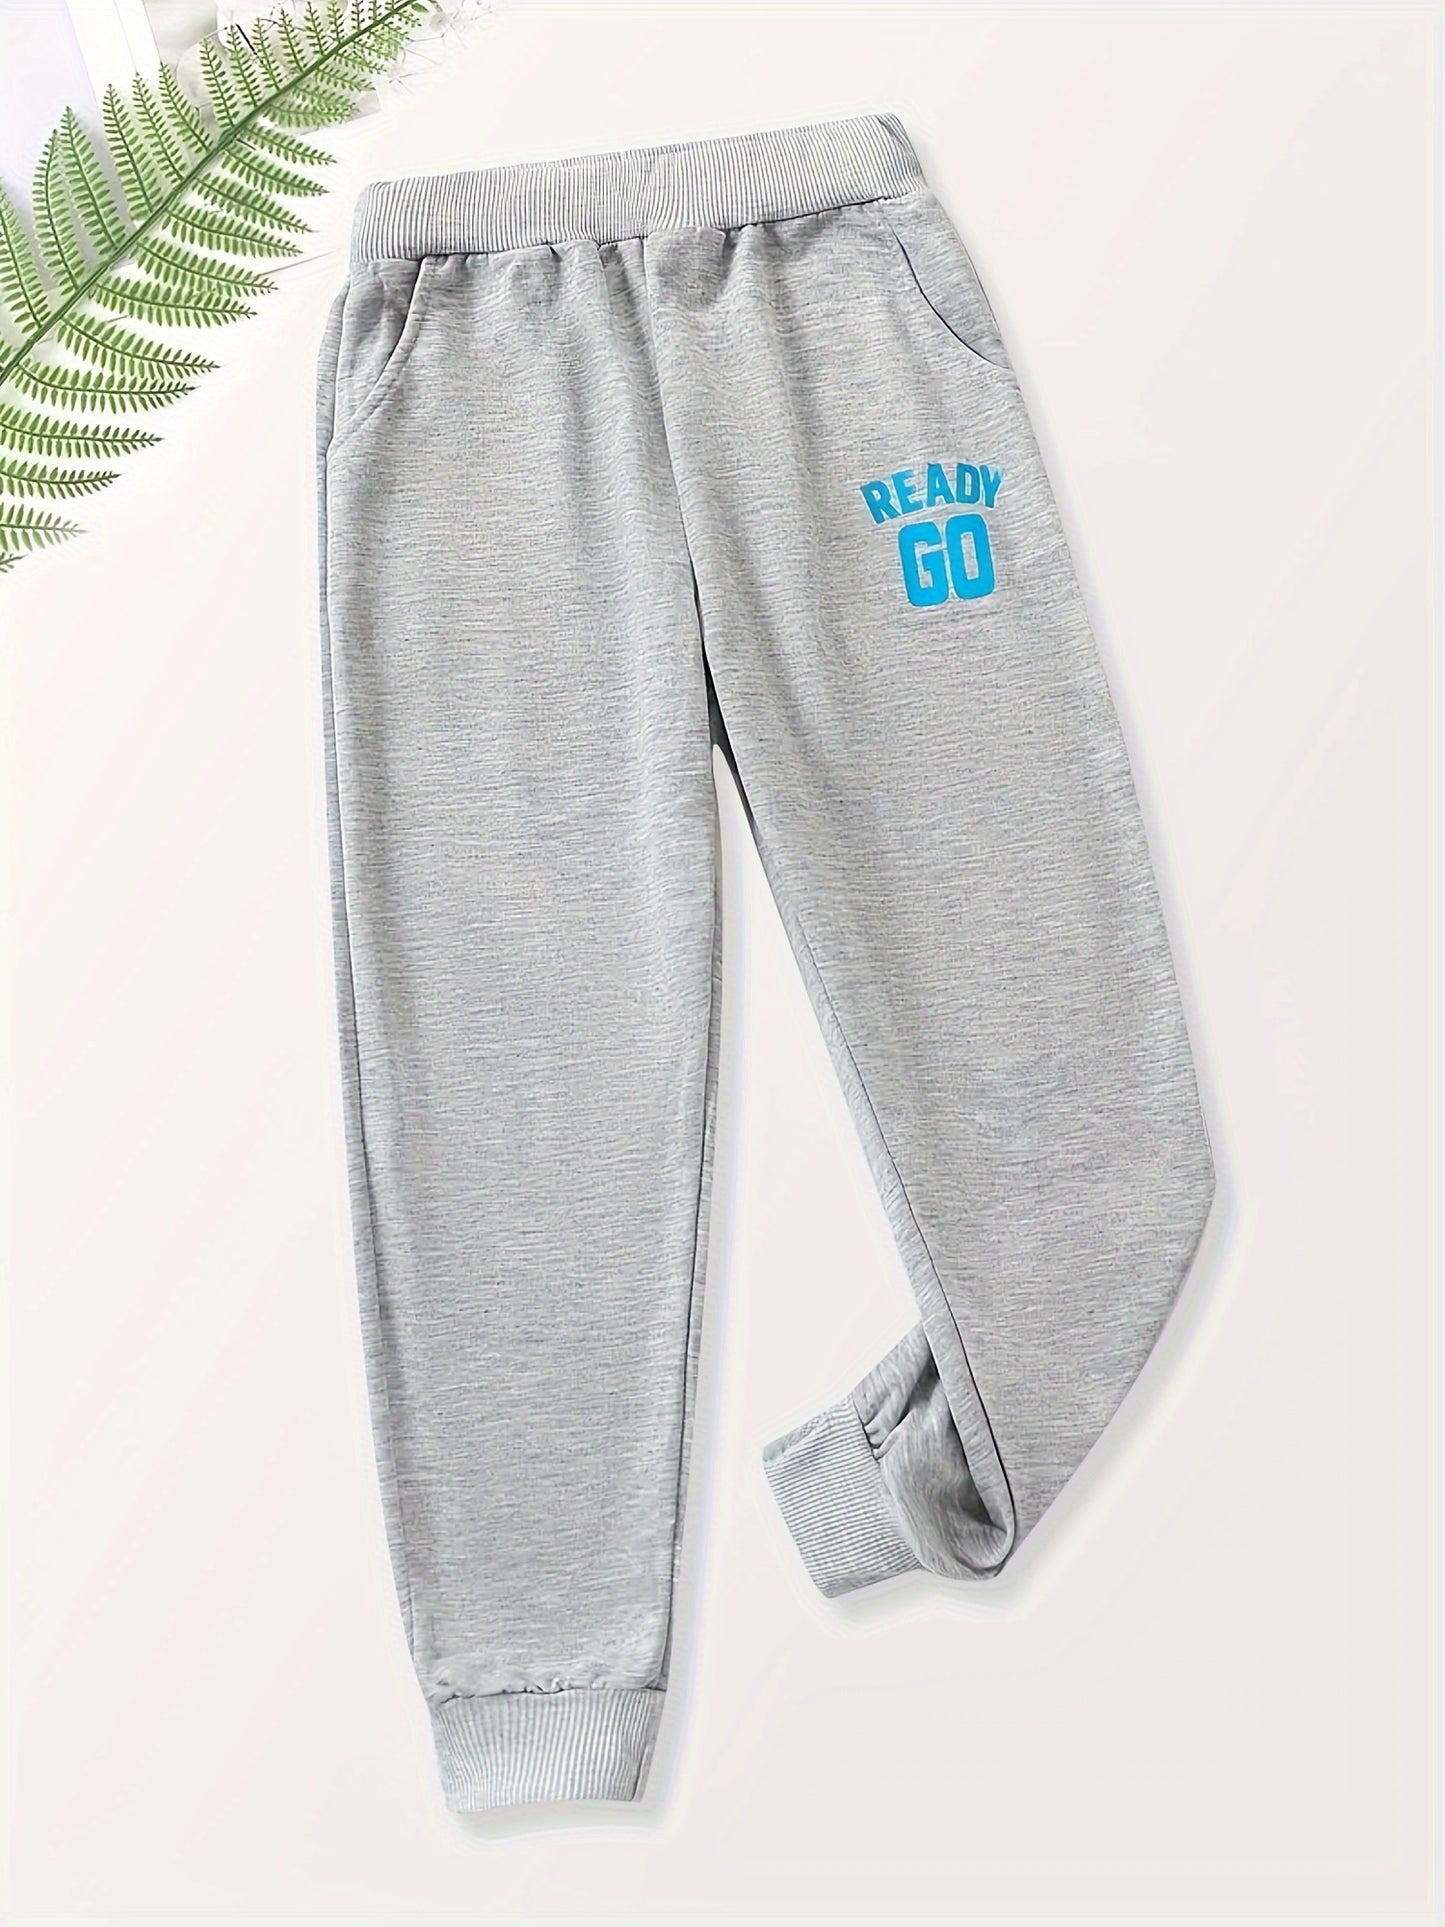 READY GO Letter Print Boys Casual Thin Comfortable Active Sweatpants, Breathable Jogger Sports Pants, Kids Clothes Outdoor